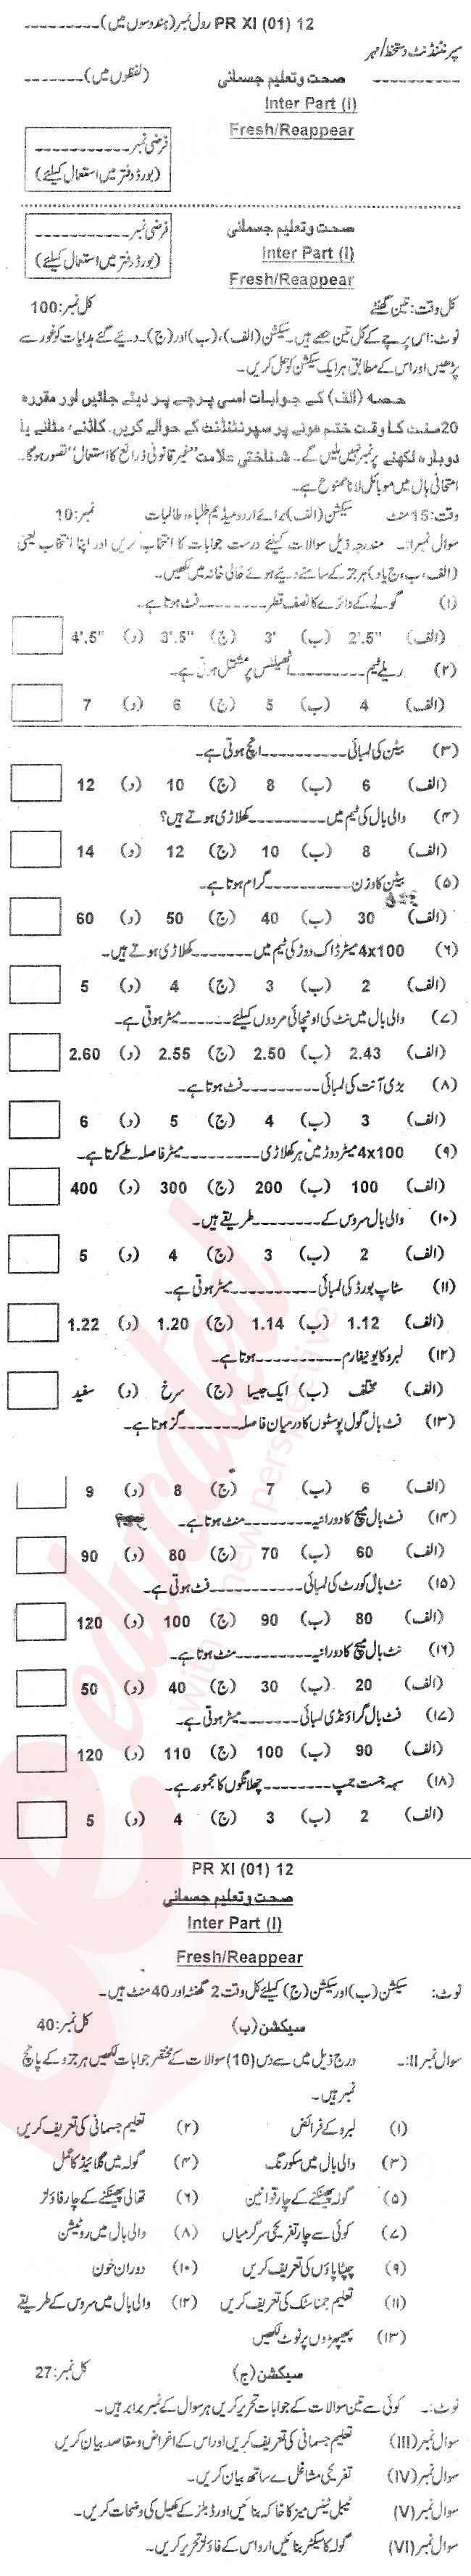 Health and Physical Education FA Part 1 Past Paper Group 1 BISE Bannu 2012